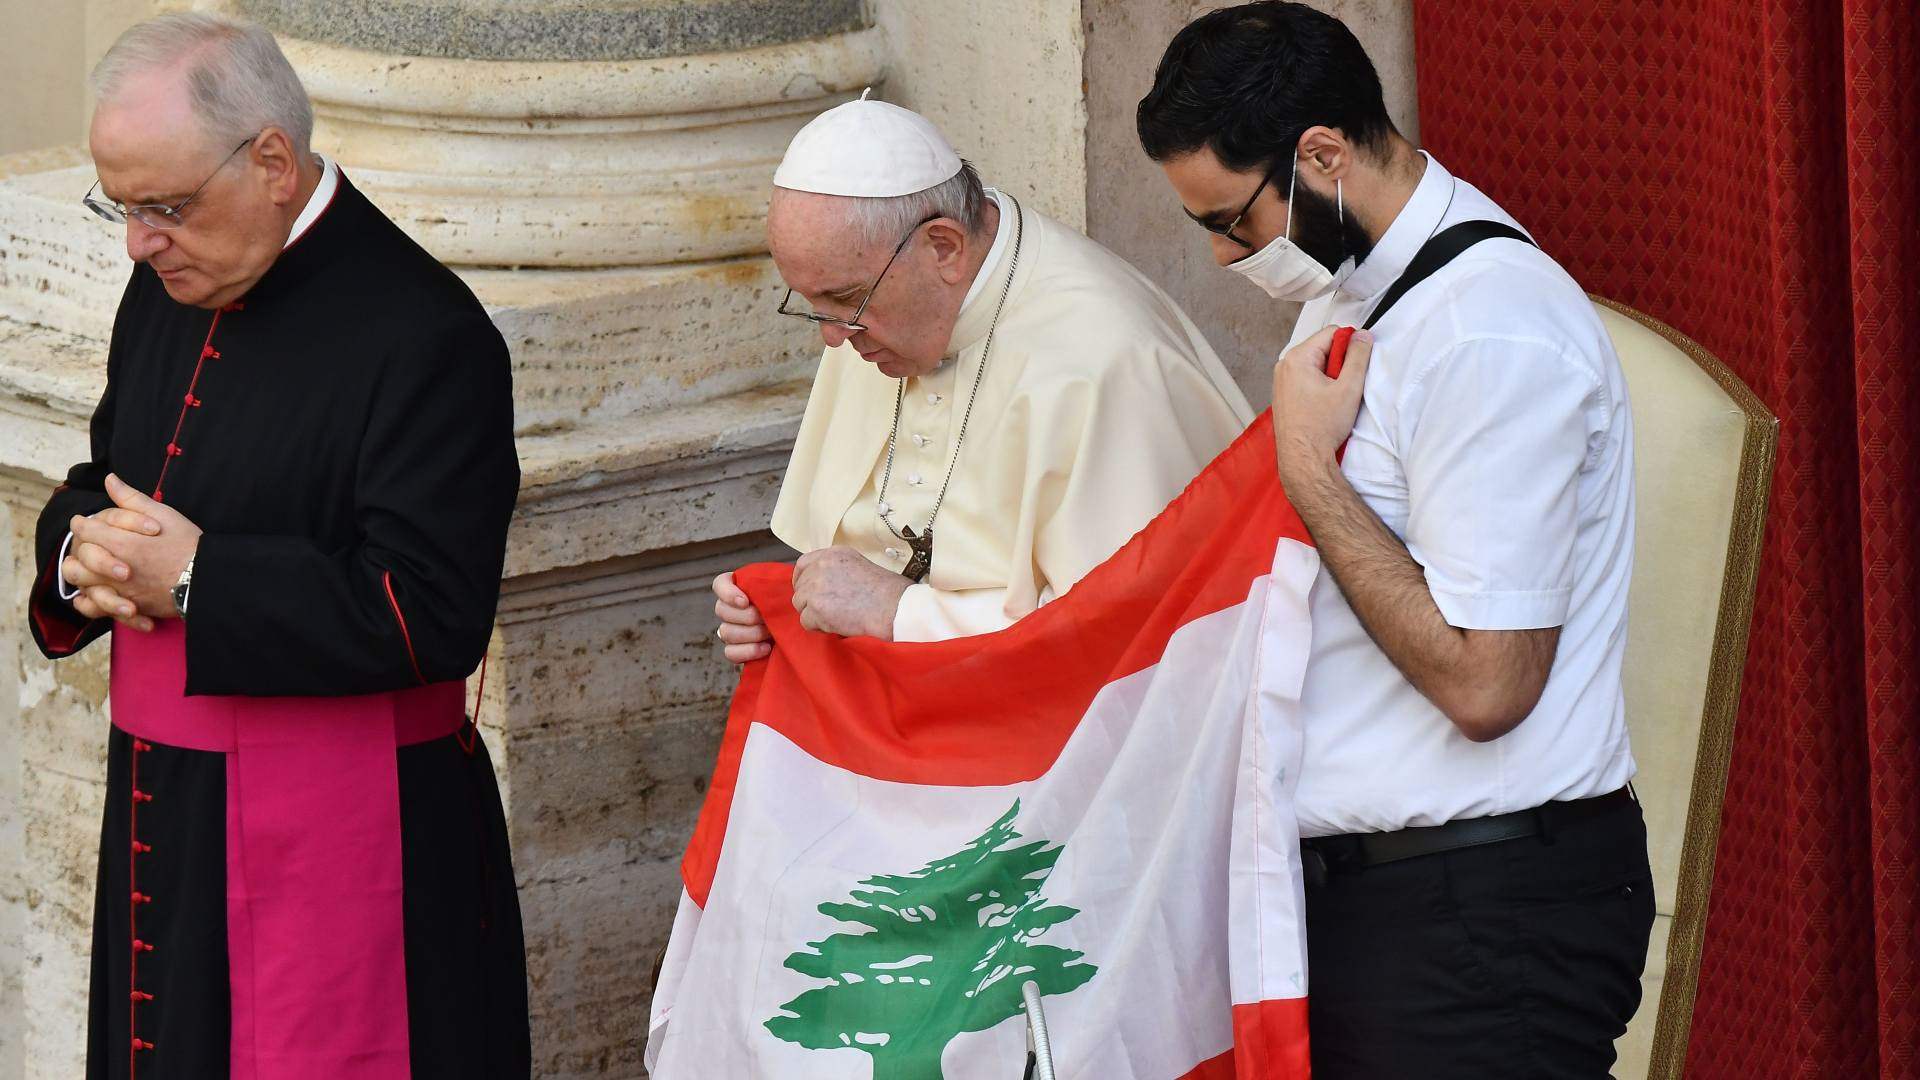 Pope Francis&#39; priority: The Vatican&#39;s &#39;hidden hand&#39; in Lebanese crisis resolution